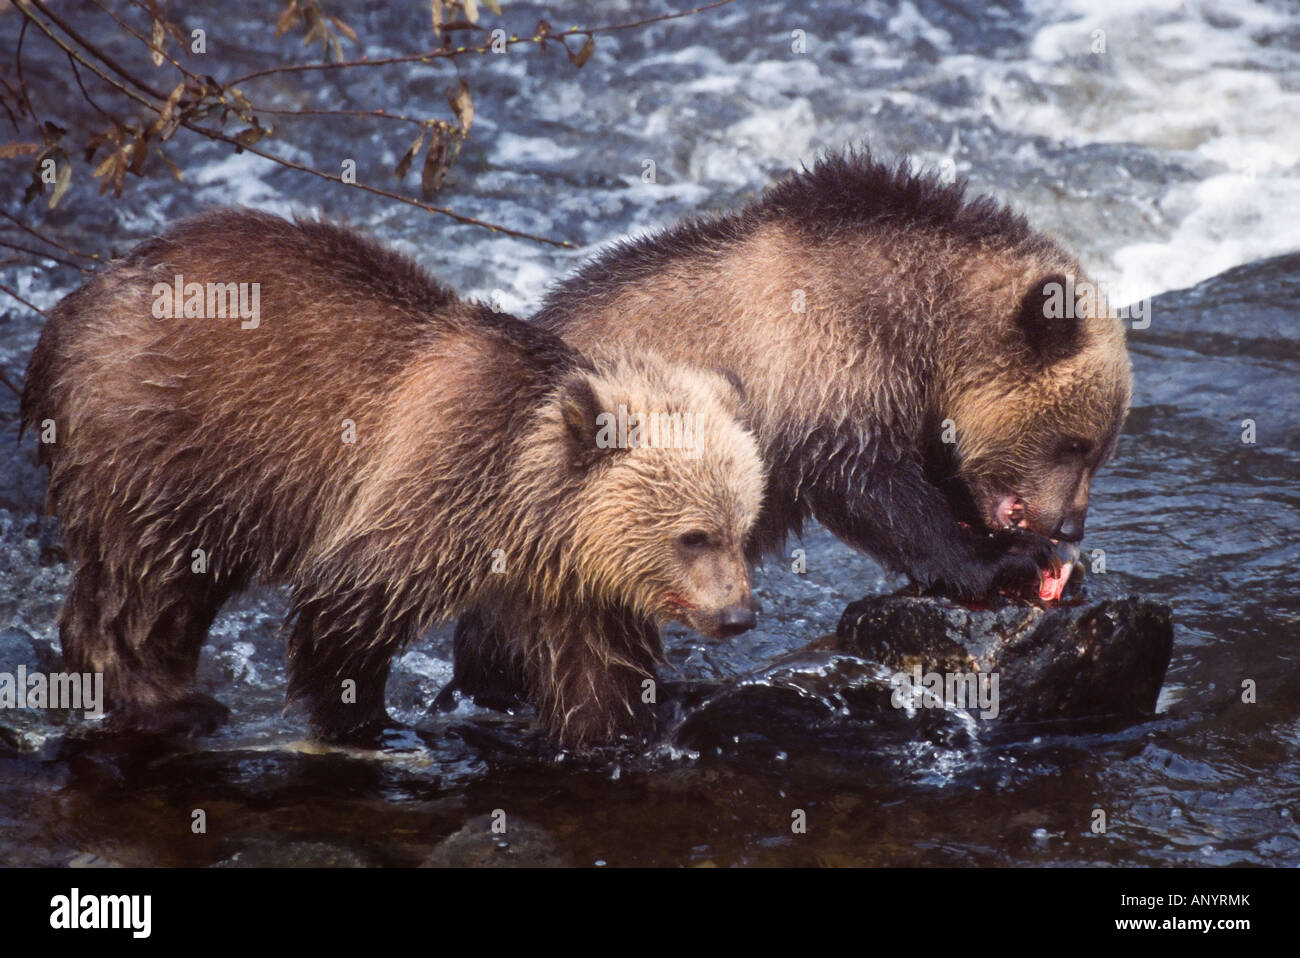 Two grizzly brown bear cubs standing on rocks in water one eating a salmon the other watching Stock Photo